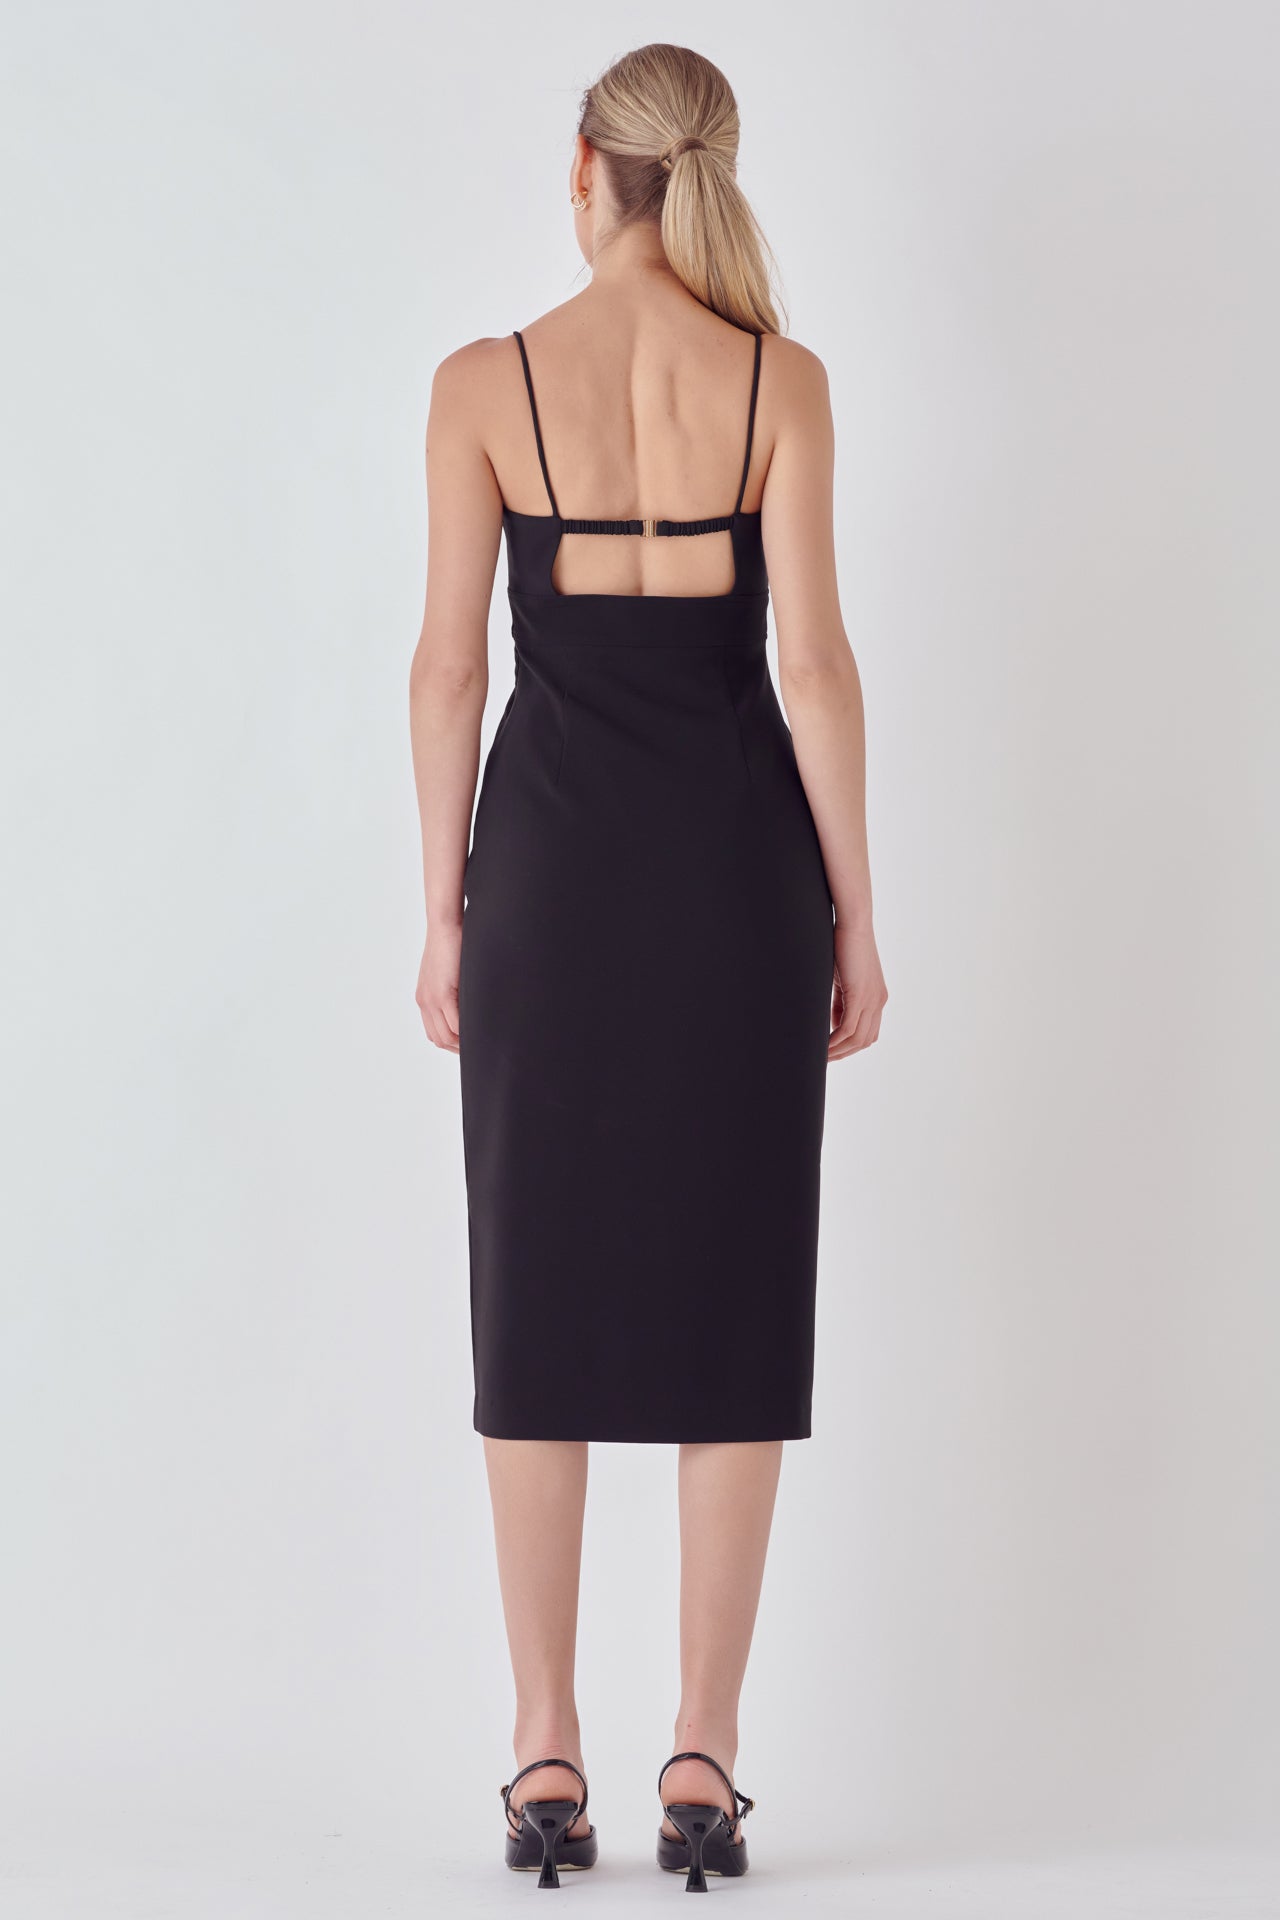 ENDLESS ROSE - Strappy Midi Pencil Dress - DRESSES available at Objectrare